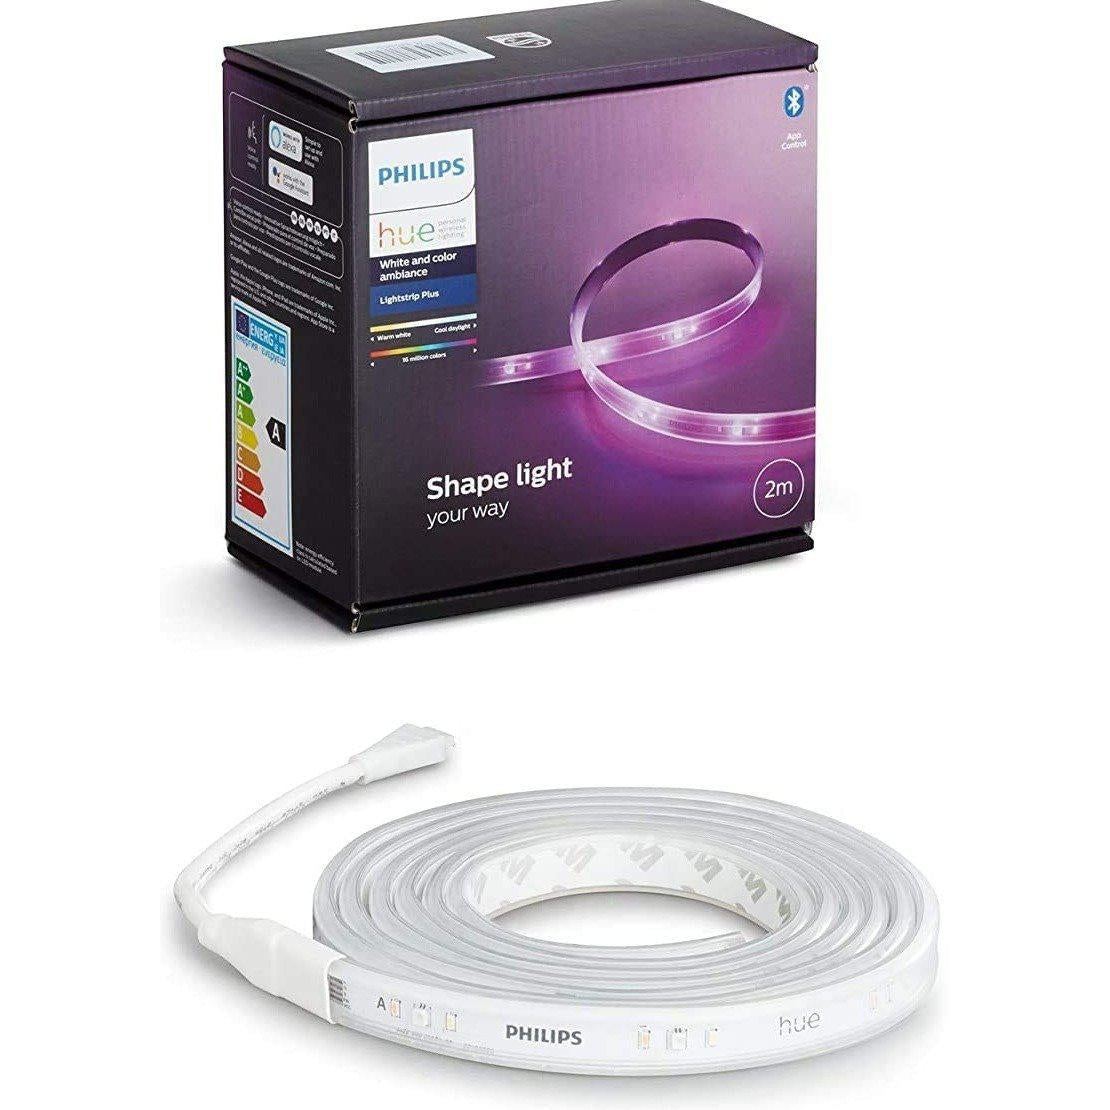 Philips Hue Lightstrip Plus White & Colour Ambiance Smart LED Kit with Bluetooth - Refurbished Pristine